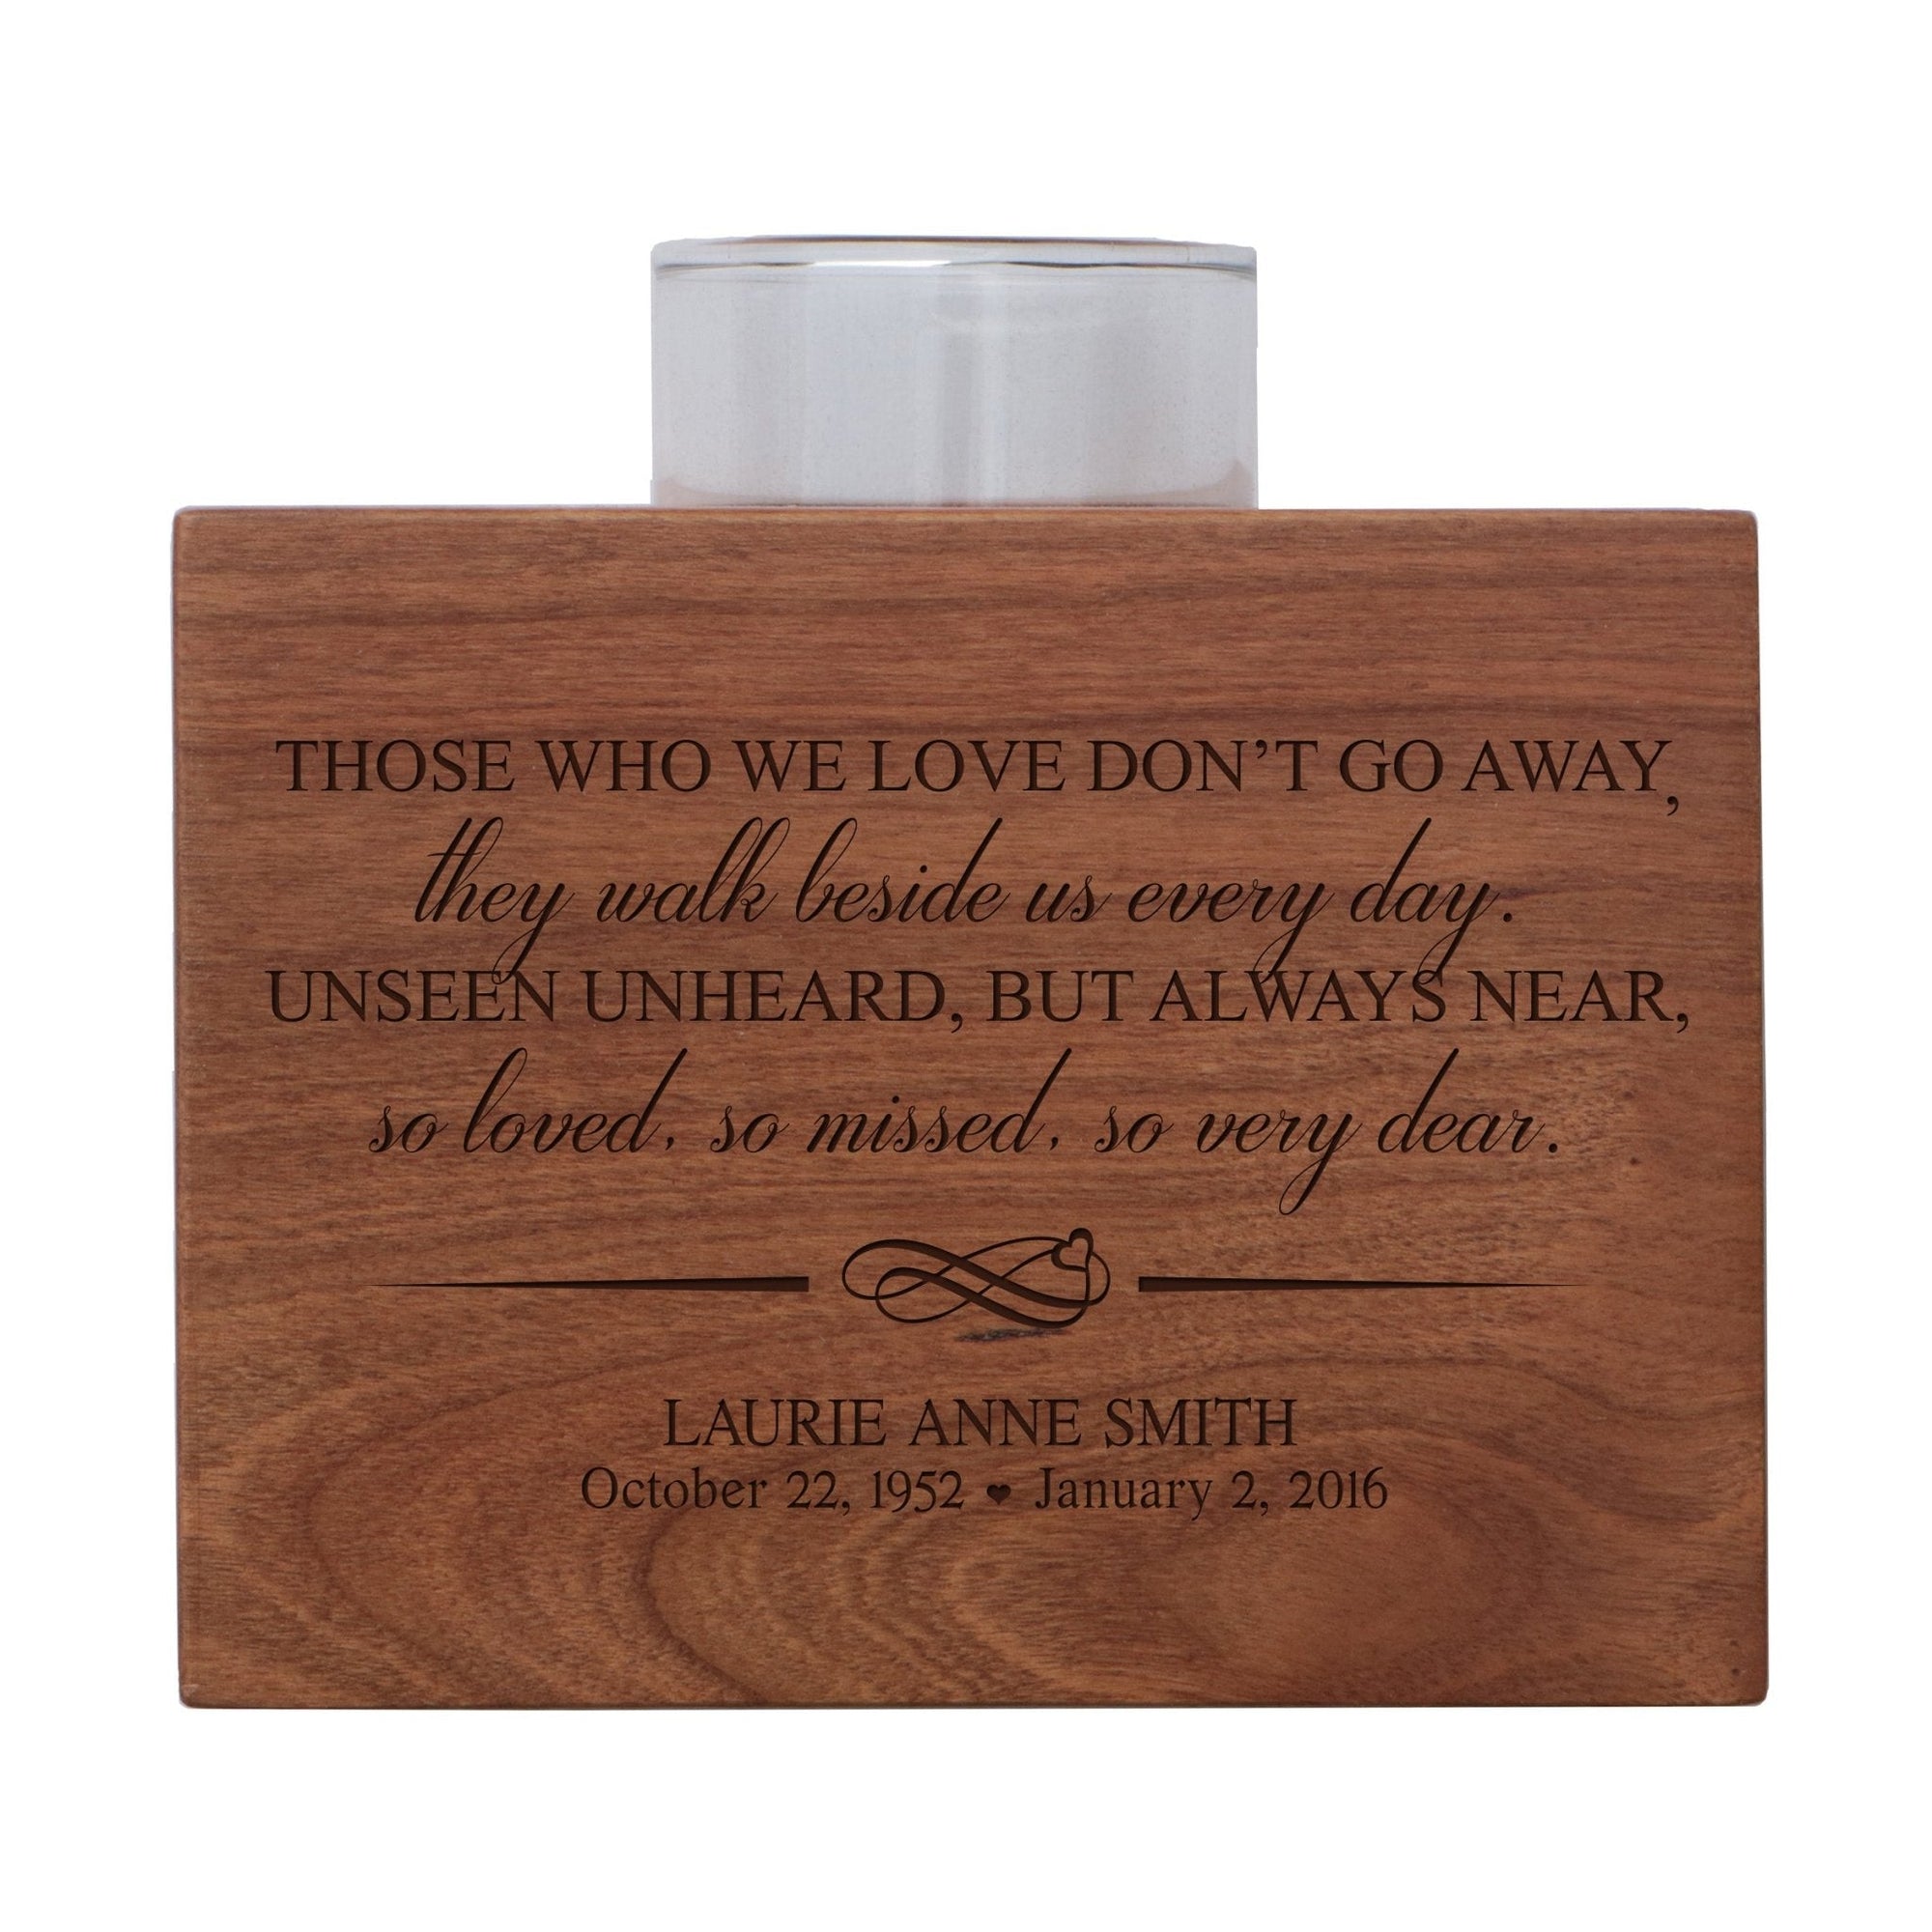 Personalized Memorial Candle Holder - Those Who We Love - LifeSong Milestones